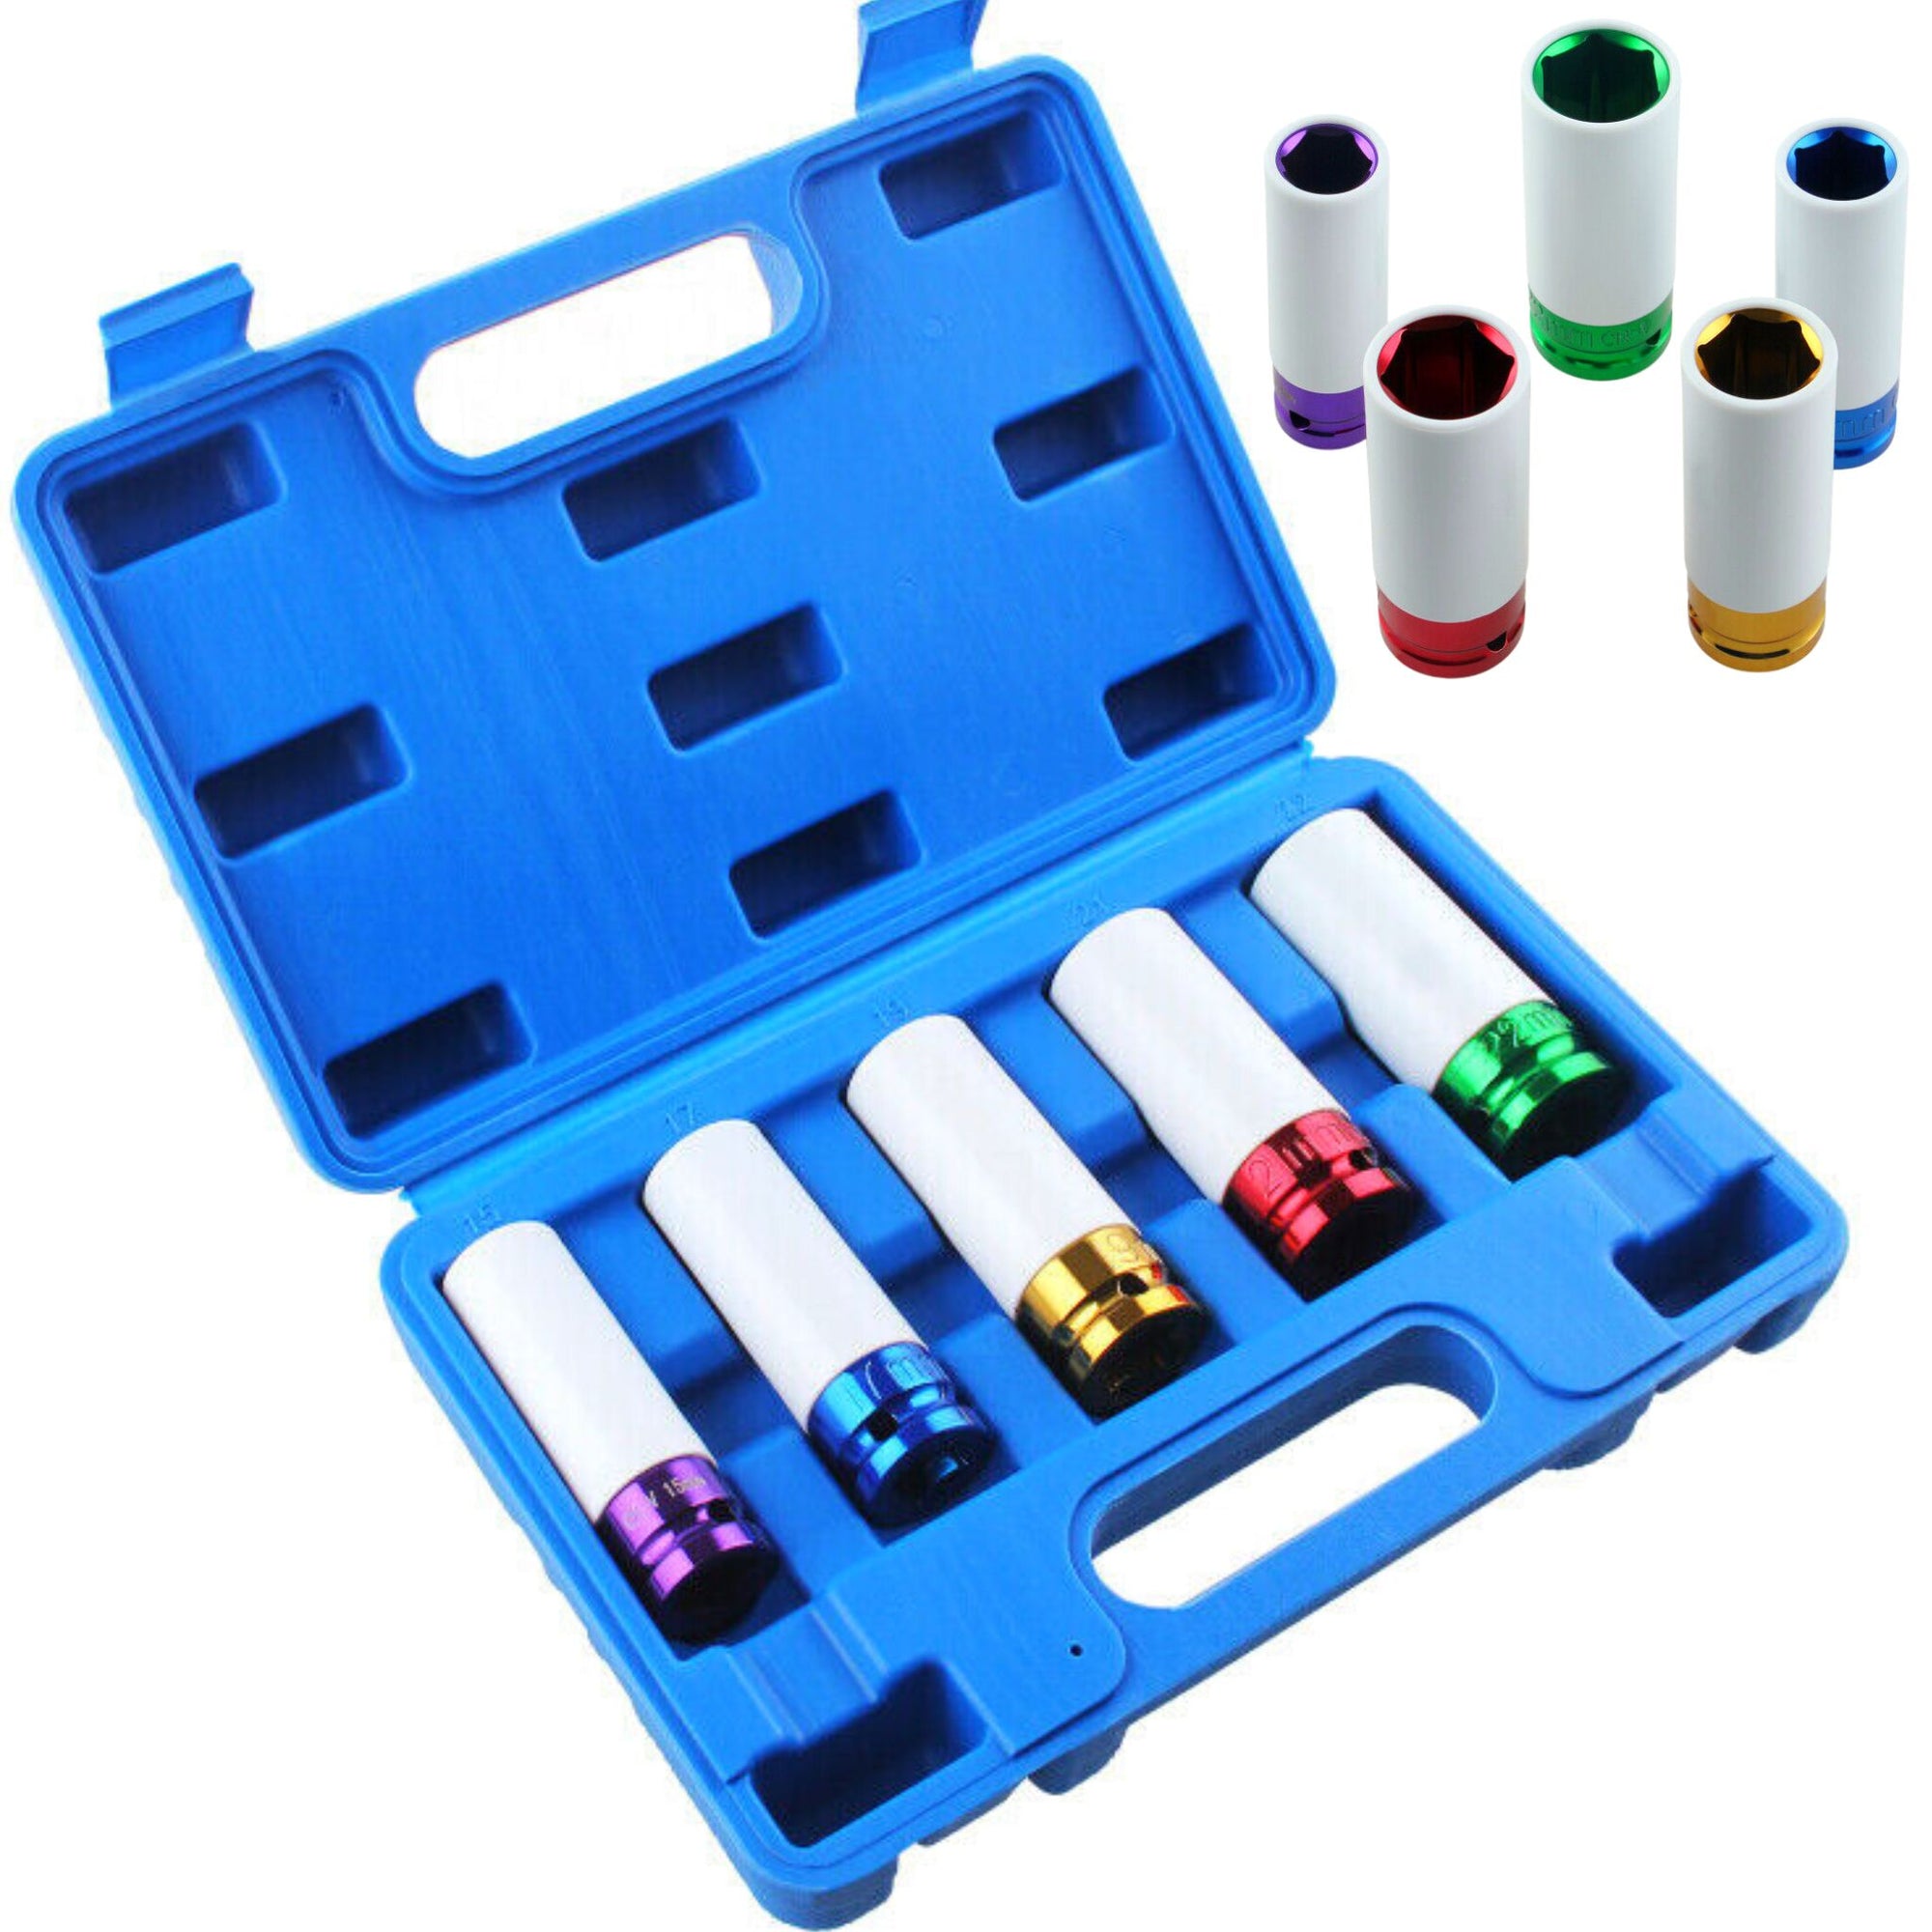 5 PIECE 1/2 INCH DEEP IMPACT WHEEL NUT SOCKET SET | (15-22 mm) - South East Clearance Centre